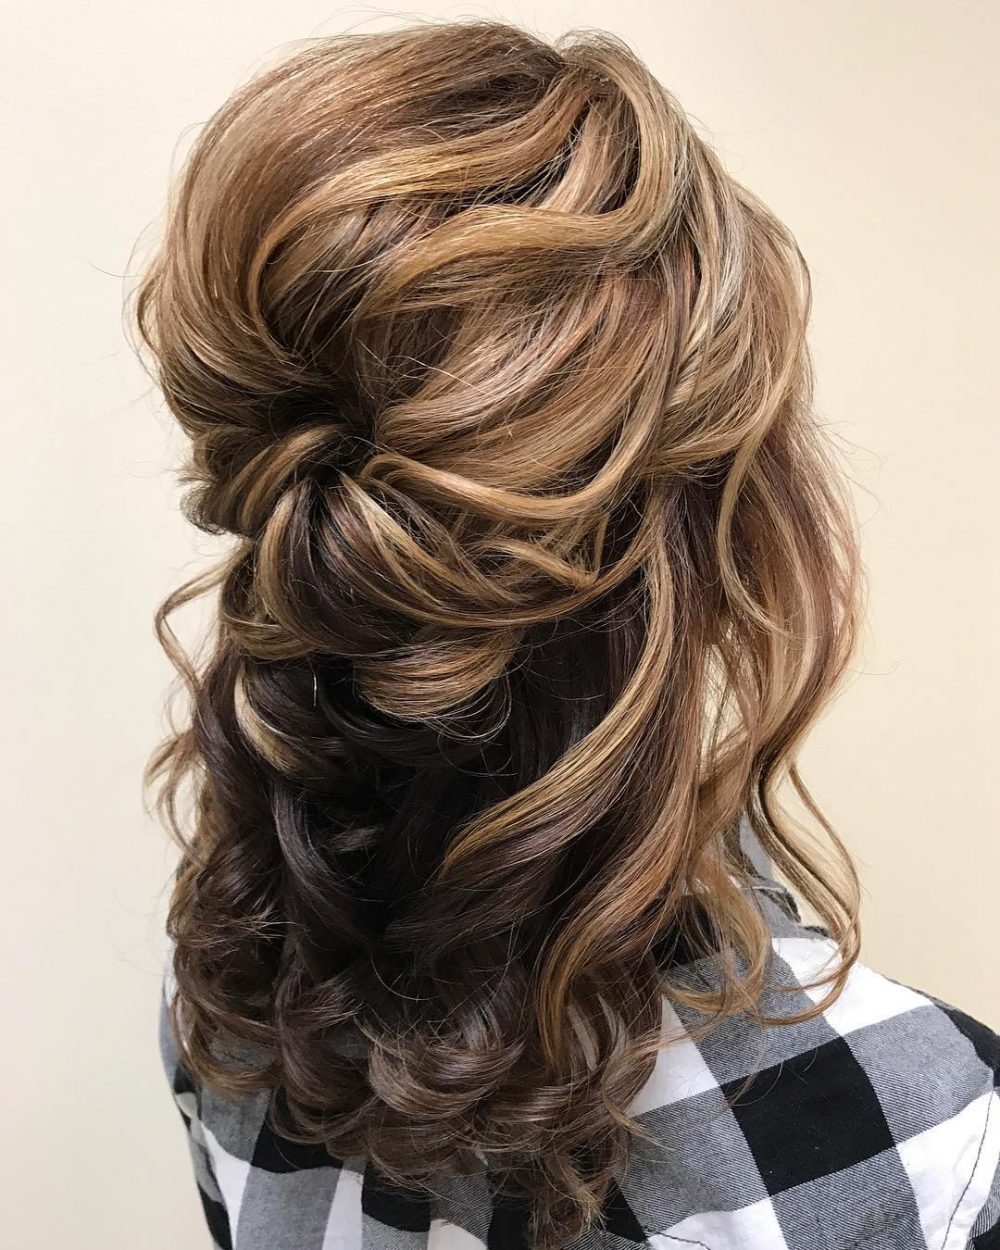 A long half updo with highlights